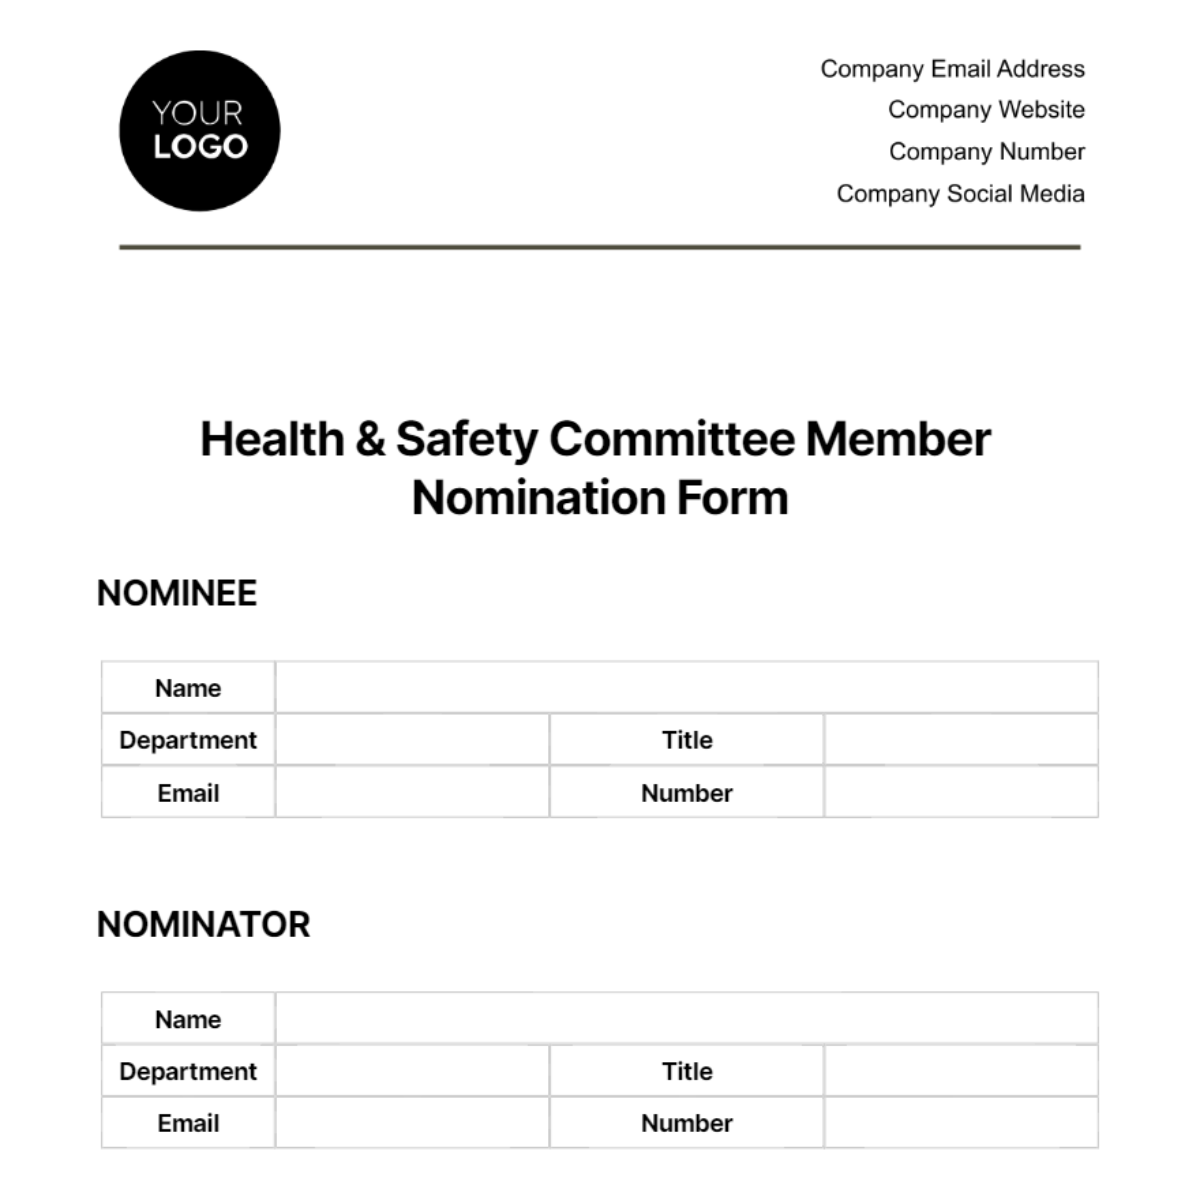 Health & Safety Committee Member Nomination Form Template